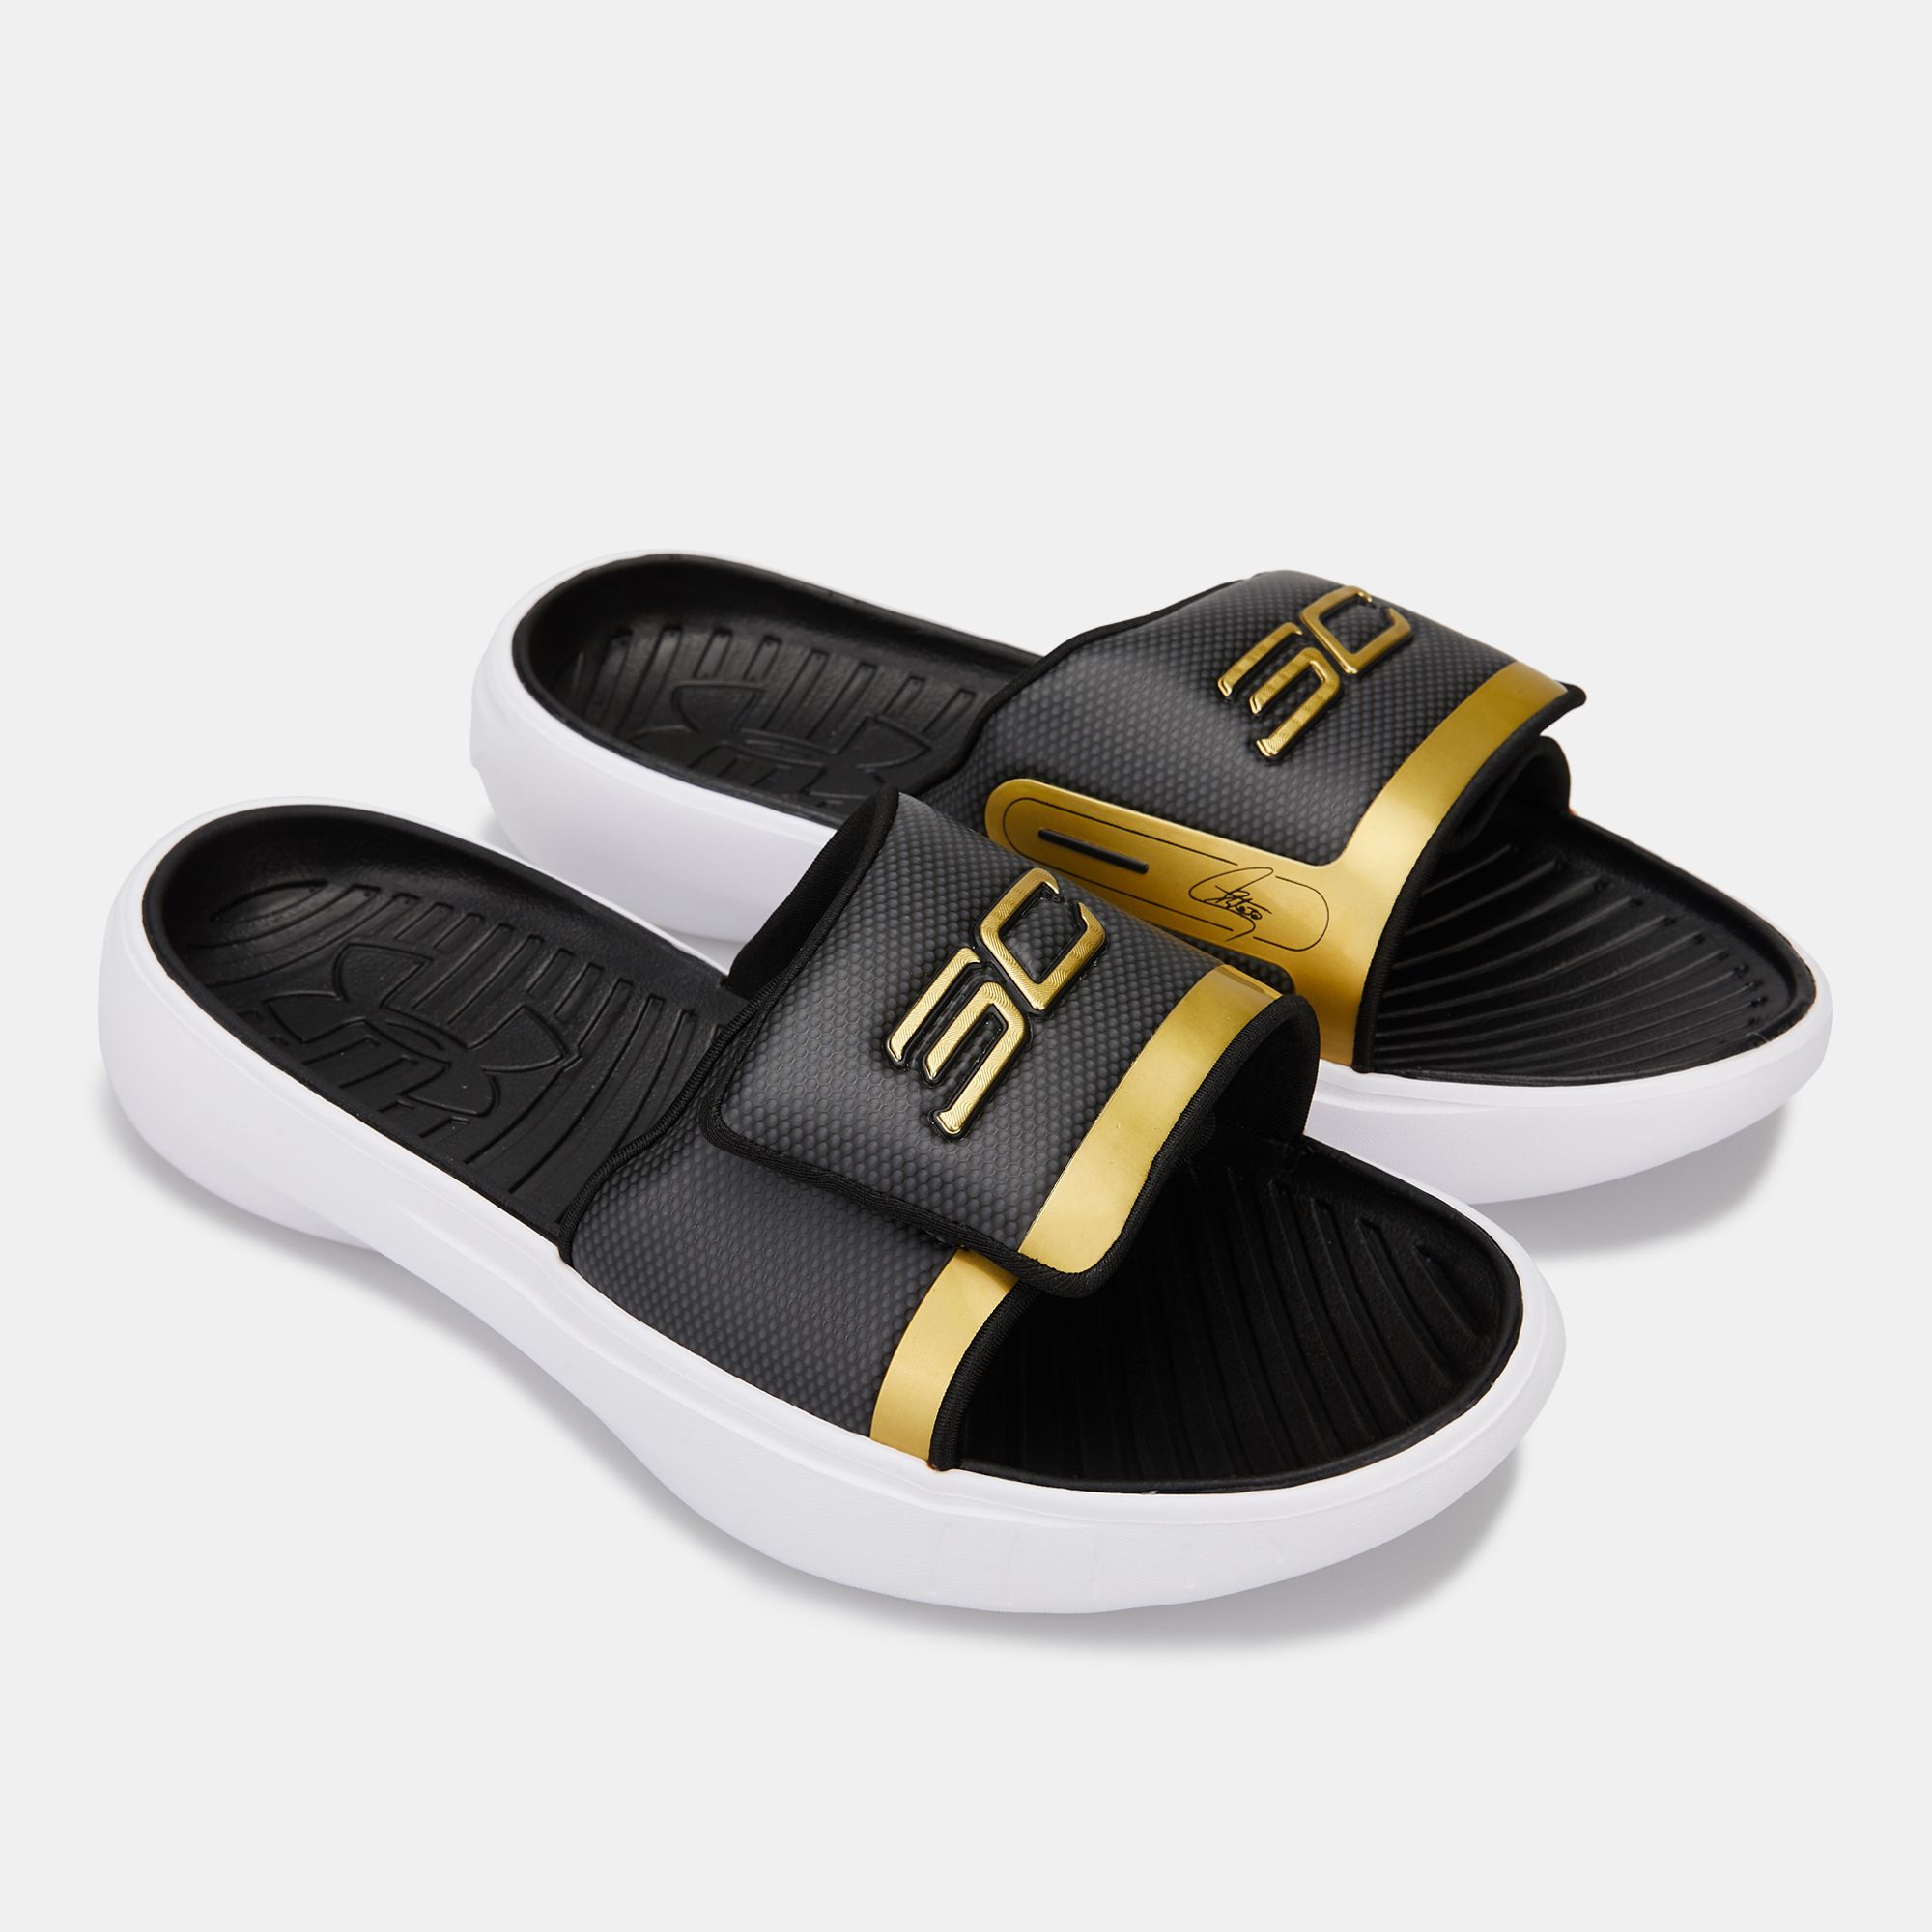 steph curry sandals